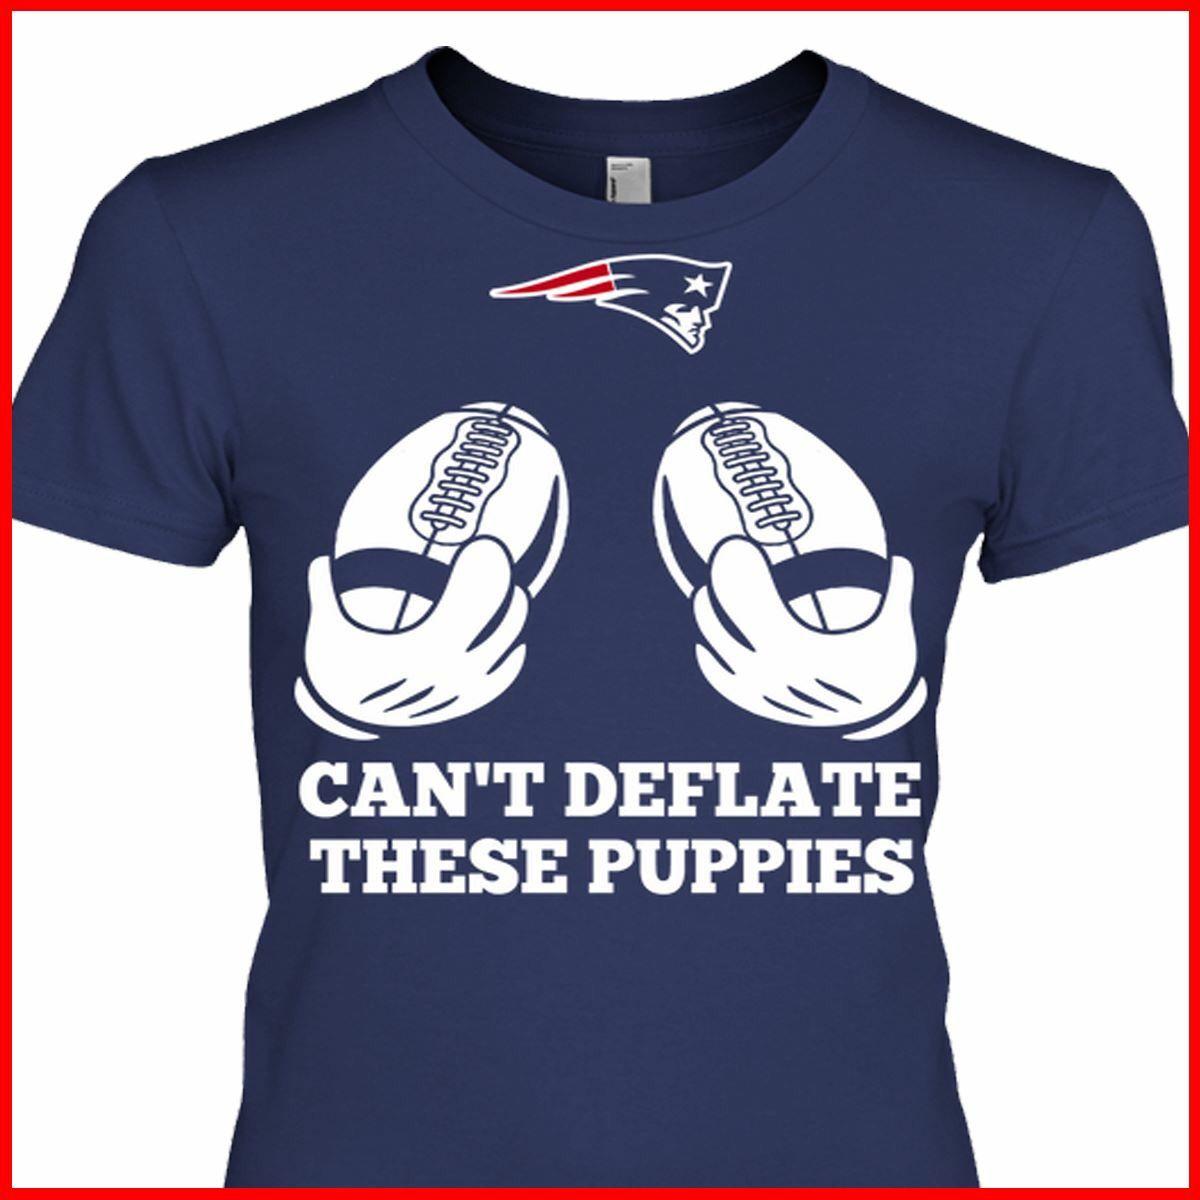 Deflate Logo - Can't deflate these | New England Patriots | Mens tops, Patriots, Tops